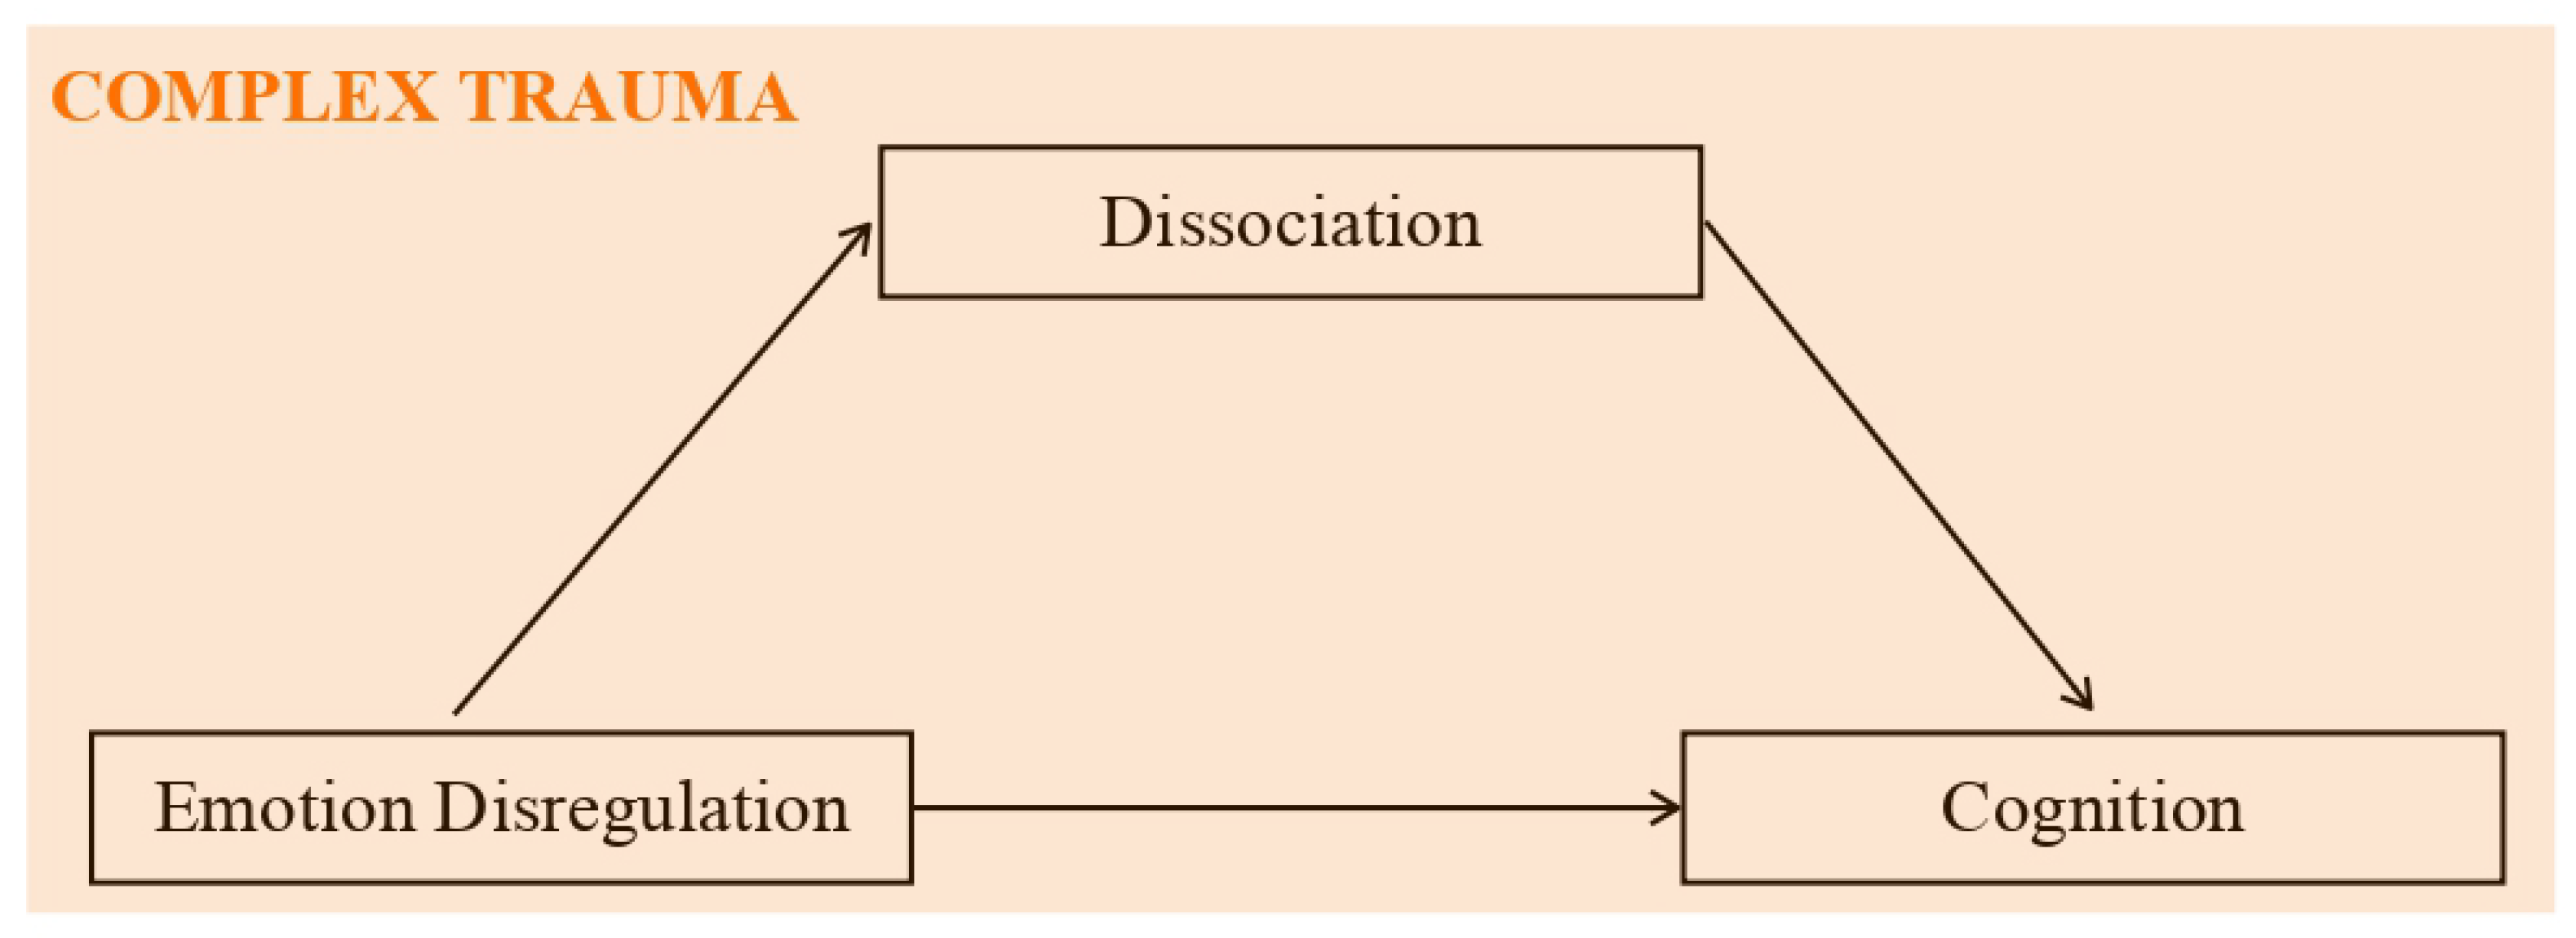 IJERPH | Free Full-Text | Can Dissociation Mediate the Relationship between  Emotional Dysregulation and Intelligence? An Empirical Study Involving  Adolescents with and without Complex Trauma Histories